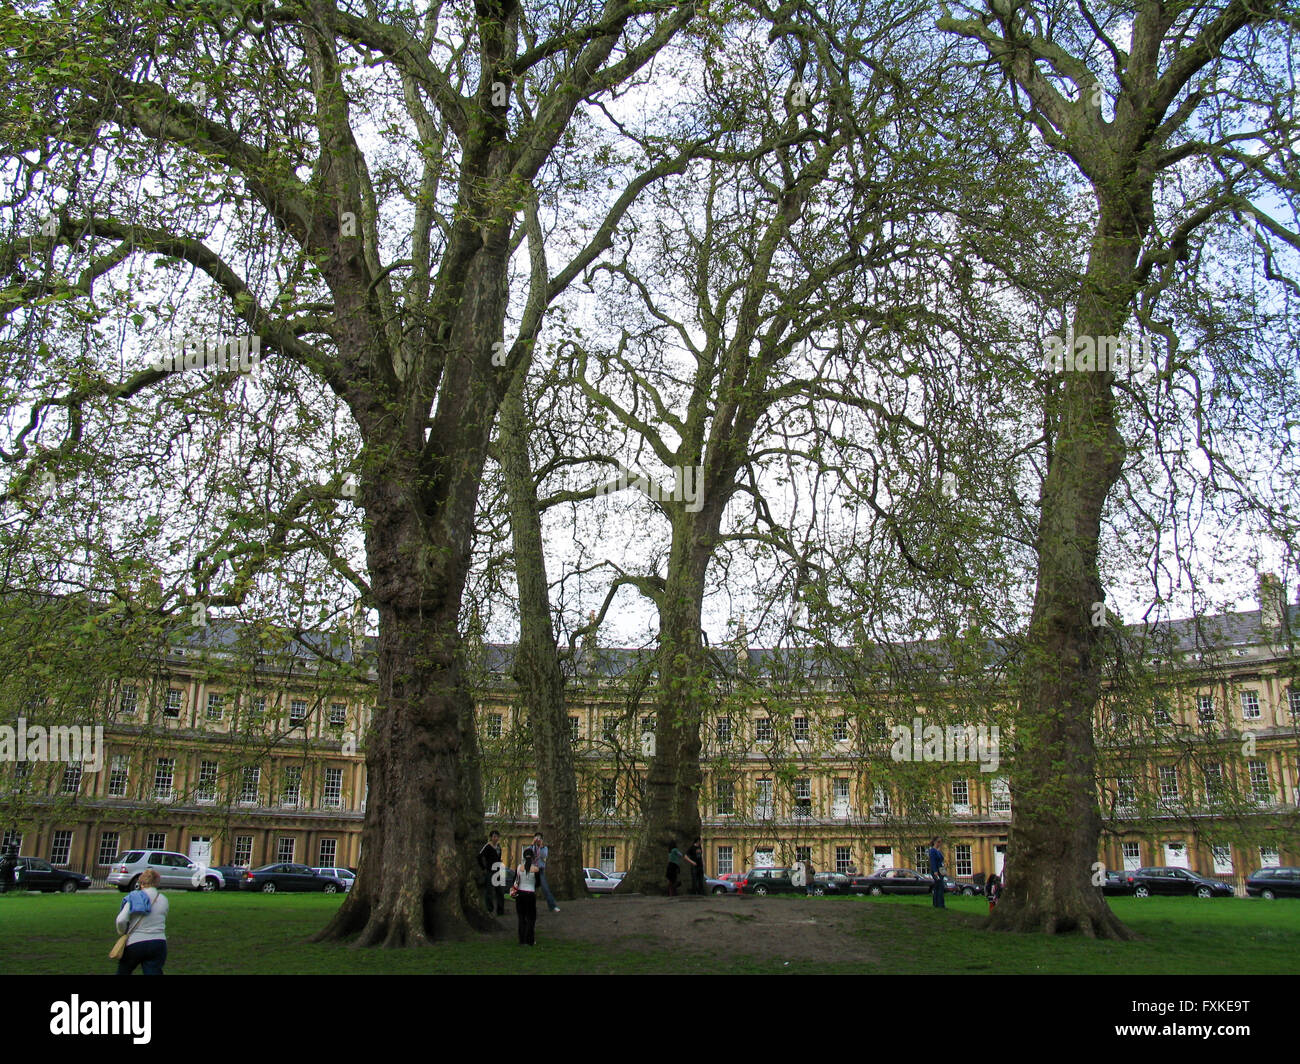 London Plane trees in the centre of the Circus, Bath. Stock Photo